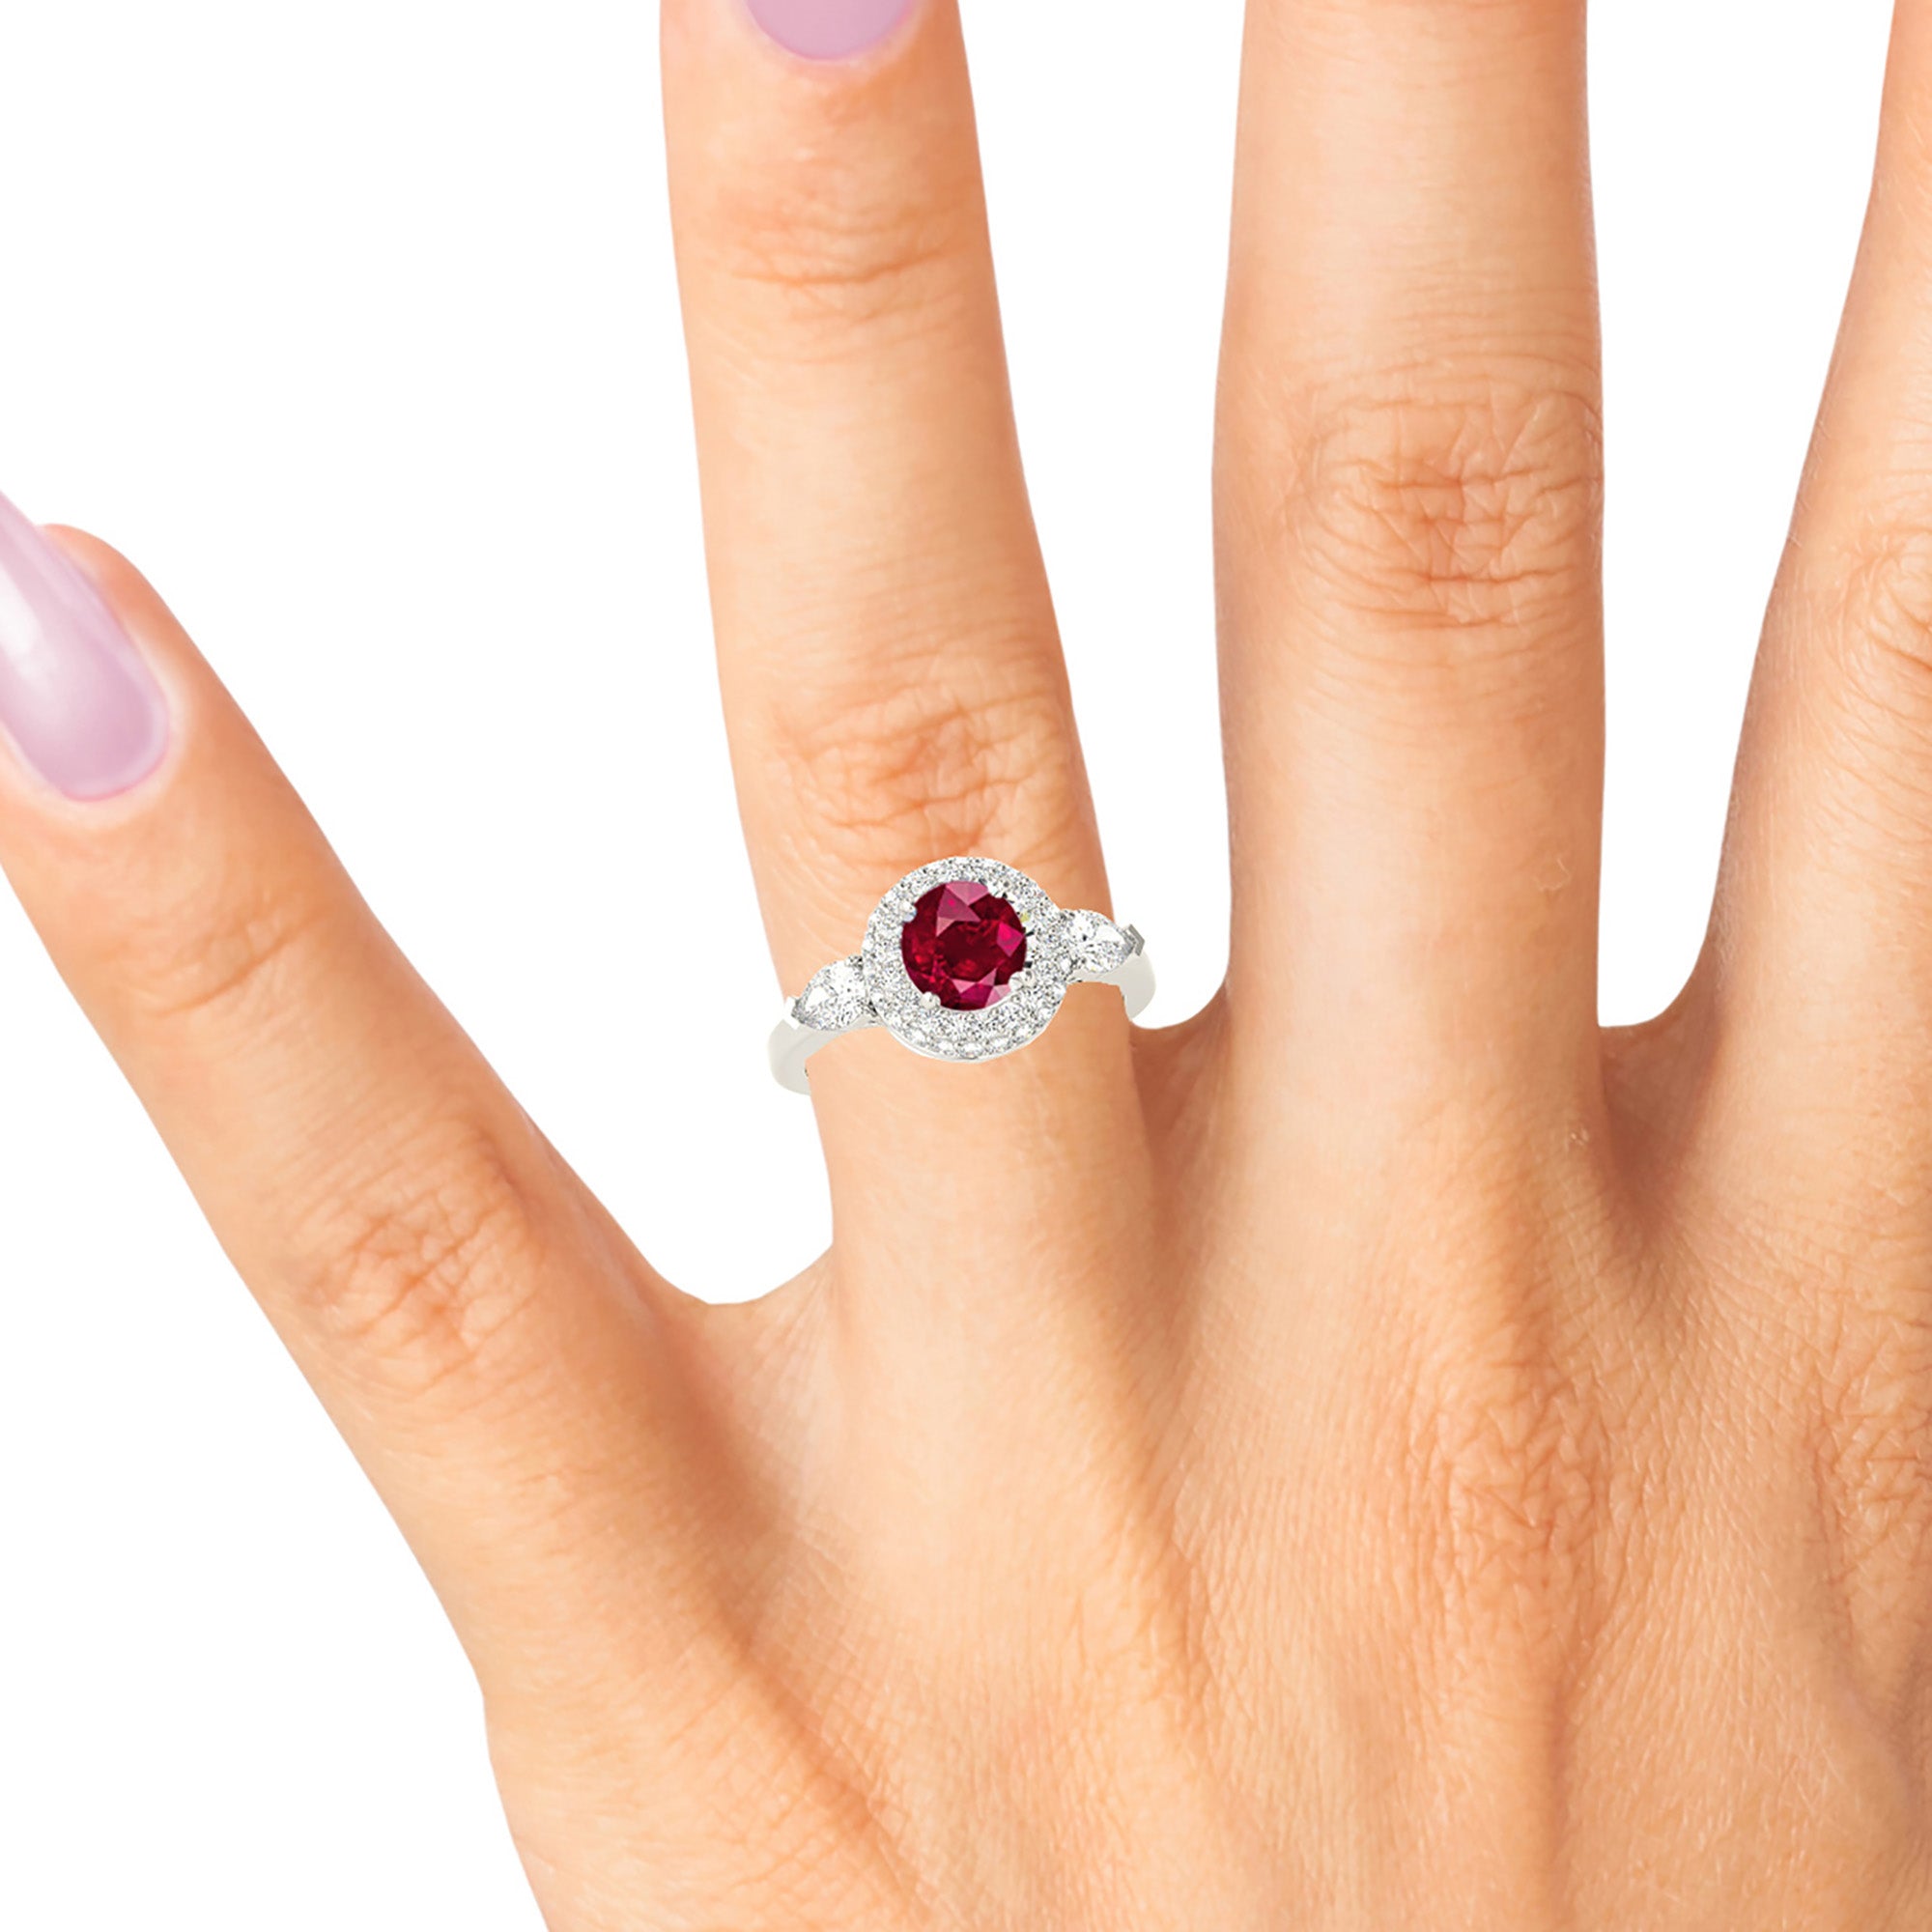 1.35 ct. Genuine Ruby Ring With 0.90 ctw. Diamond Halo And Side Accent Pear Shape Diamonds-in 14K/18K White, Yellow, Rose Gold and Platinum - Christmas Jewelry Gift -VIRABYANI